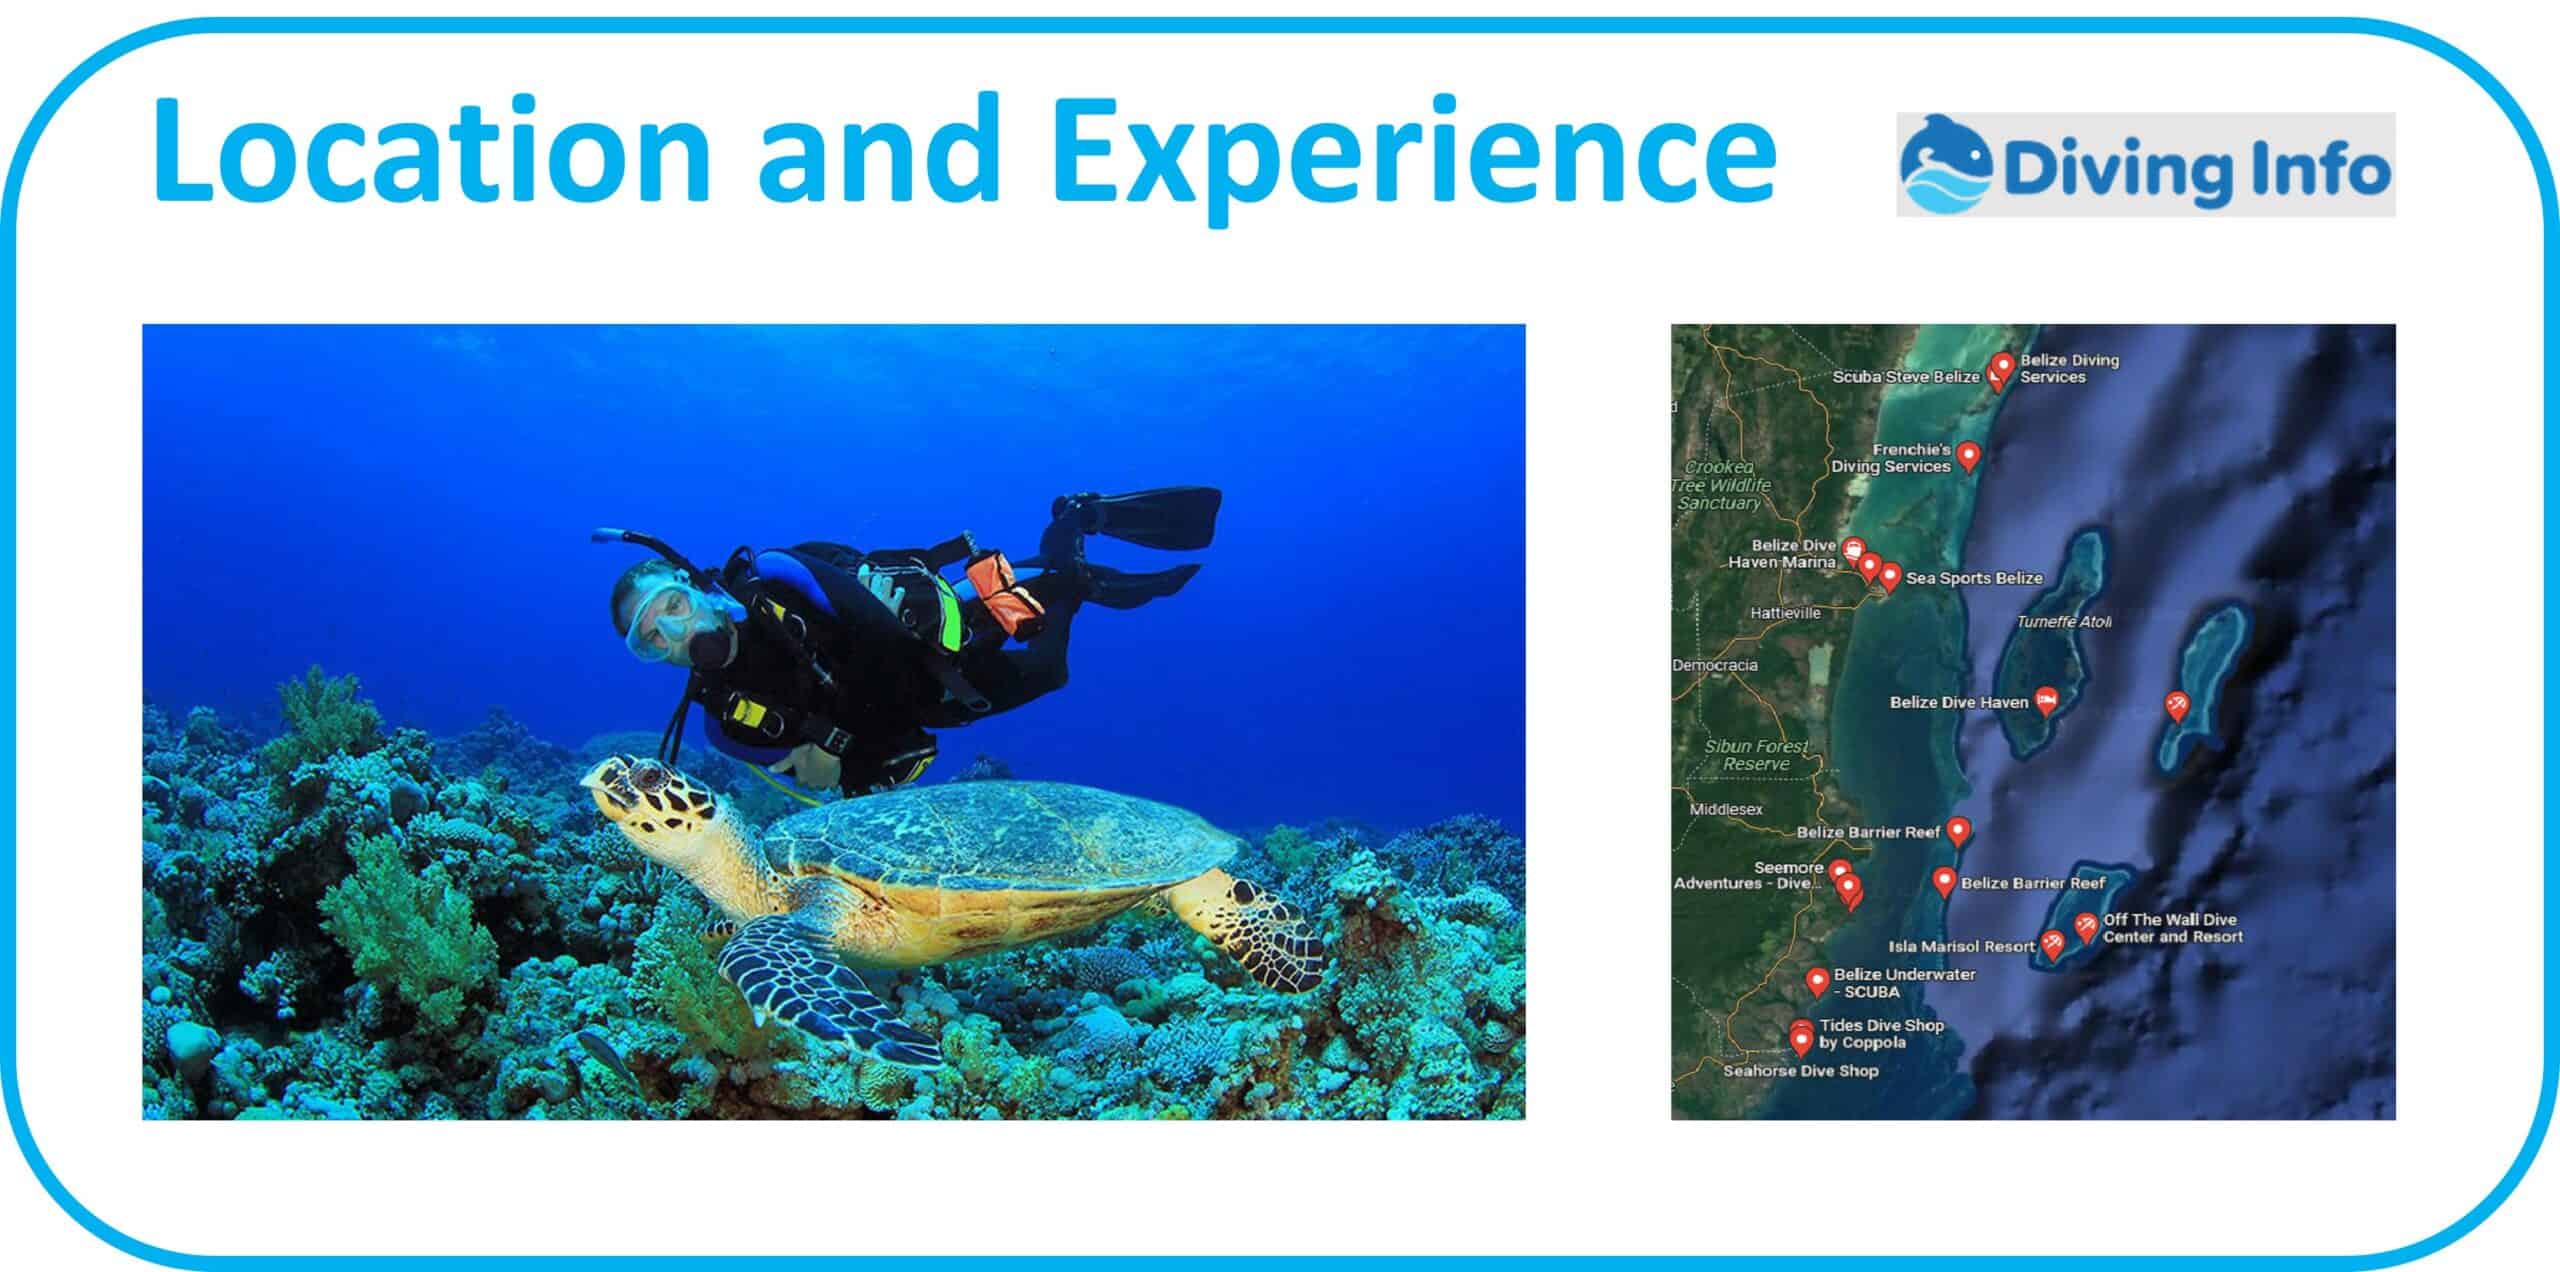 Belize Barrier Reef Location and Experience